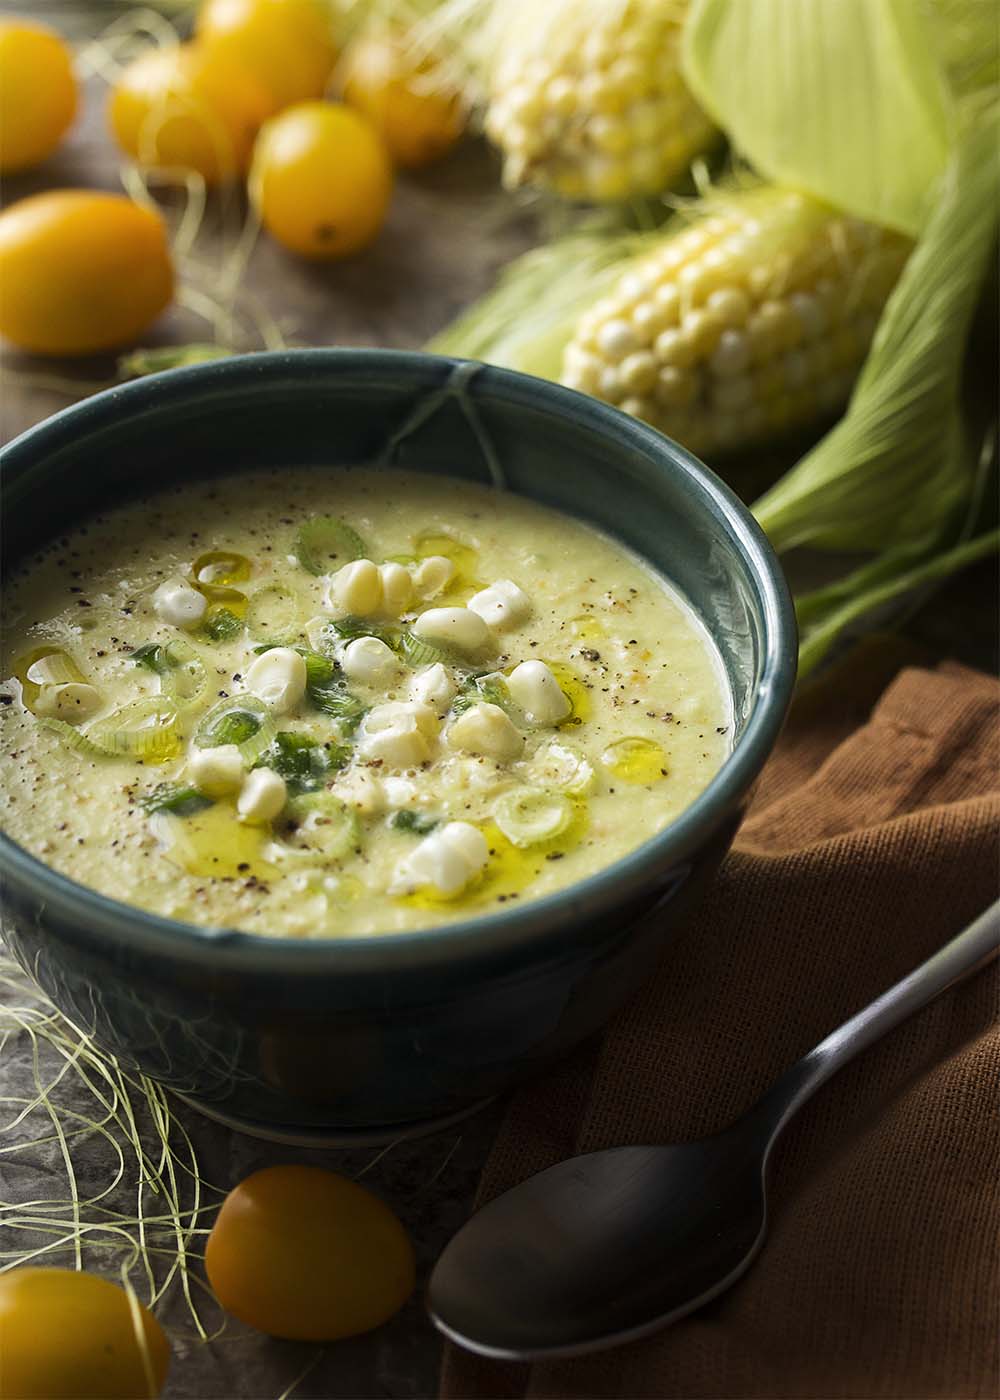 Corn gazpacho is a sweet and spicy cold soup which is refreshing for summer! Easy and quick, it's full of fresh corn, yellow tomatoes, and spicy peppers. | justalittlebitofbacon.com